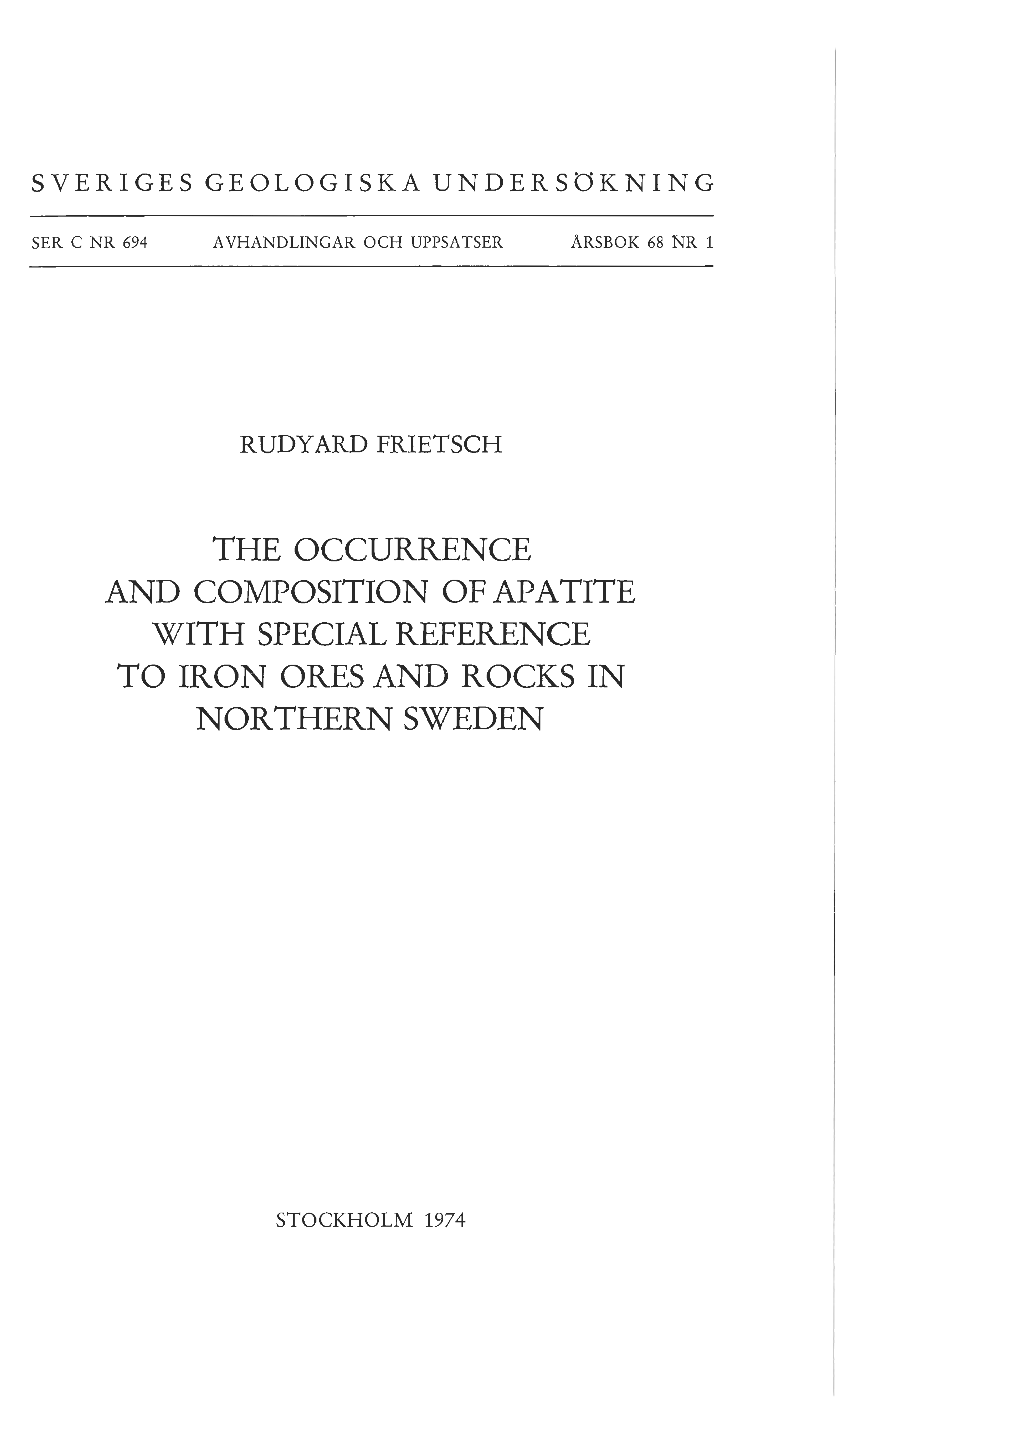 The Occurrence and Composition of Apatite with Special Reference to Iron Ores and Rocks in Northern Sweden